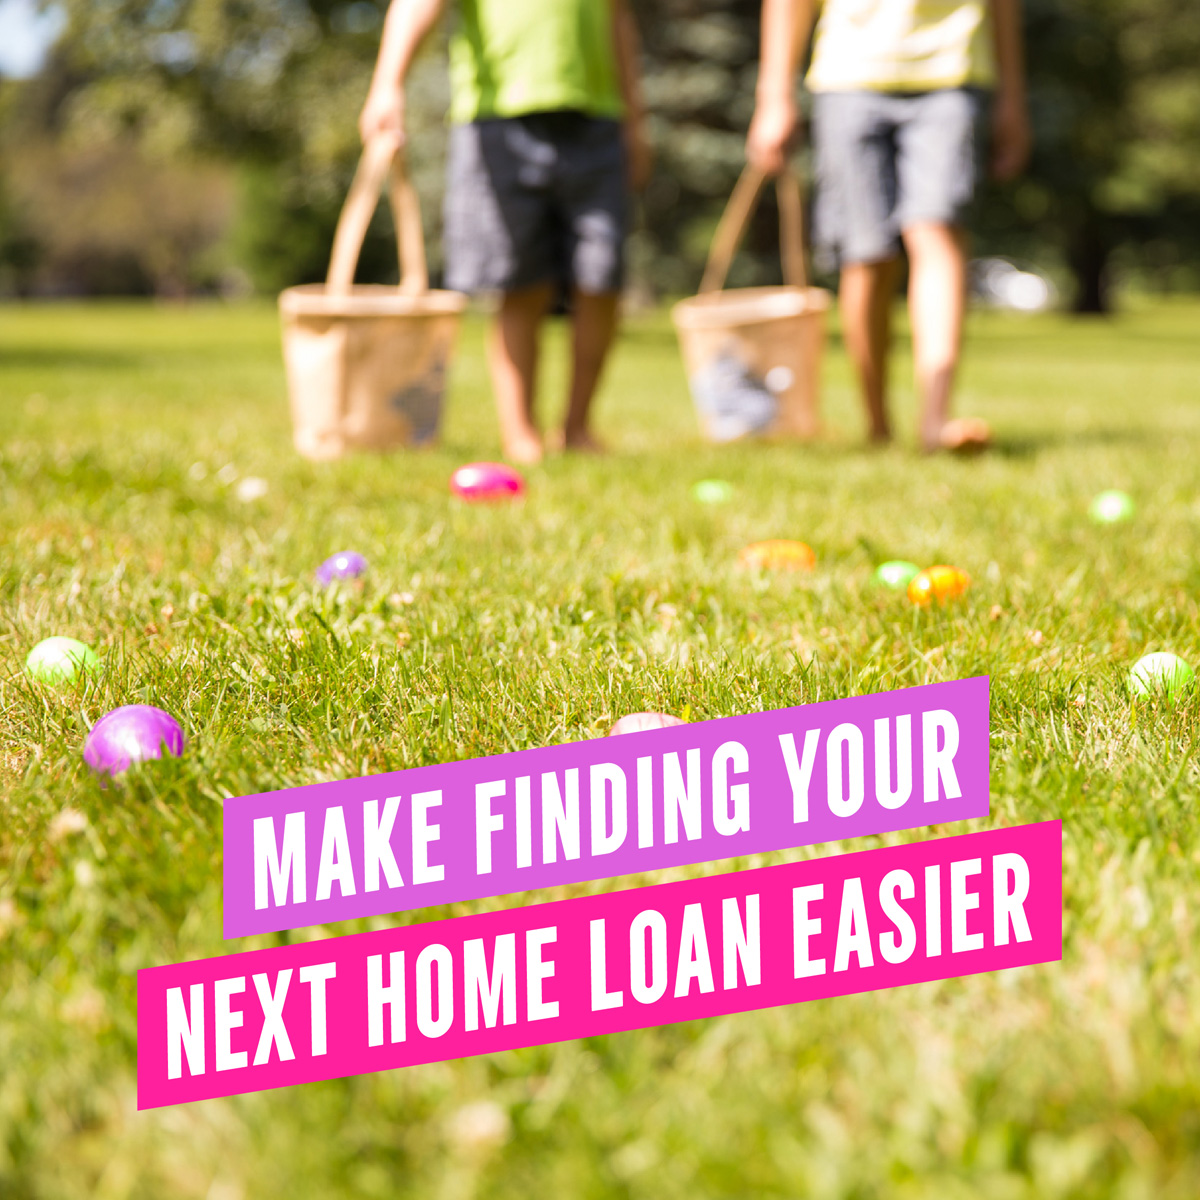 Finding a great home loan for your dream home doesn't have to be challenging. Give us a call and discover how far we'll go to find rates and terms that meet your unique needs. #mortgageexperts #mortgageoptions #mortgagechoices